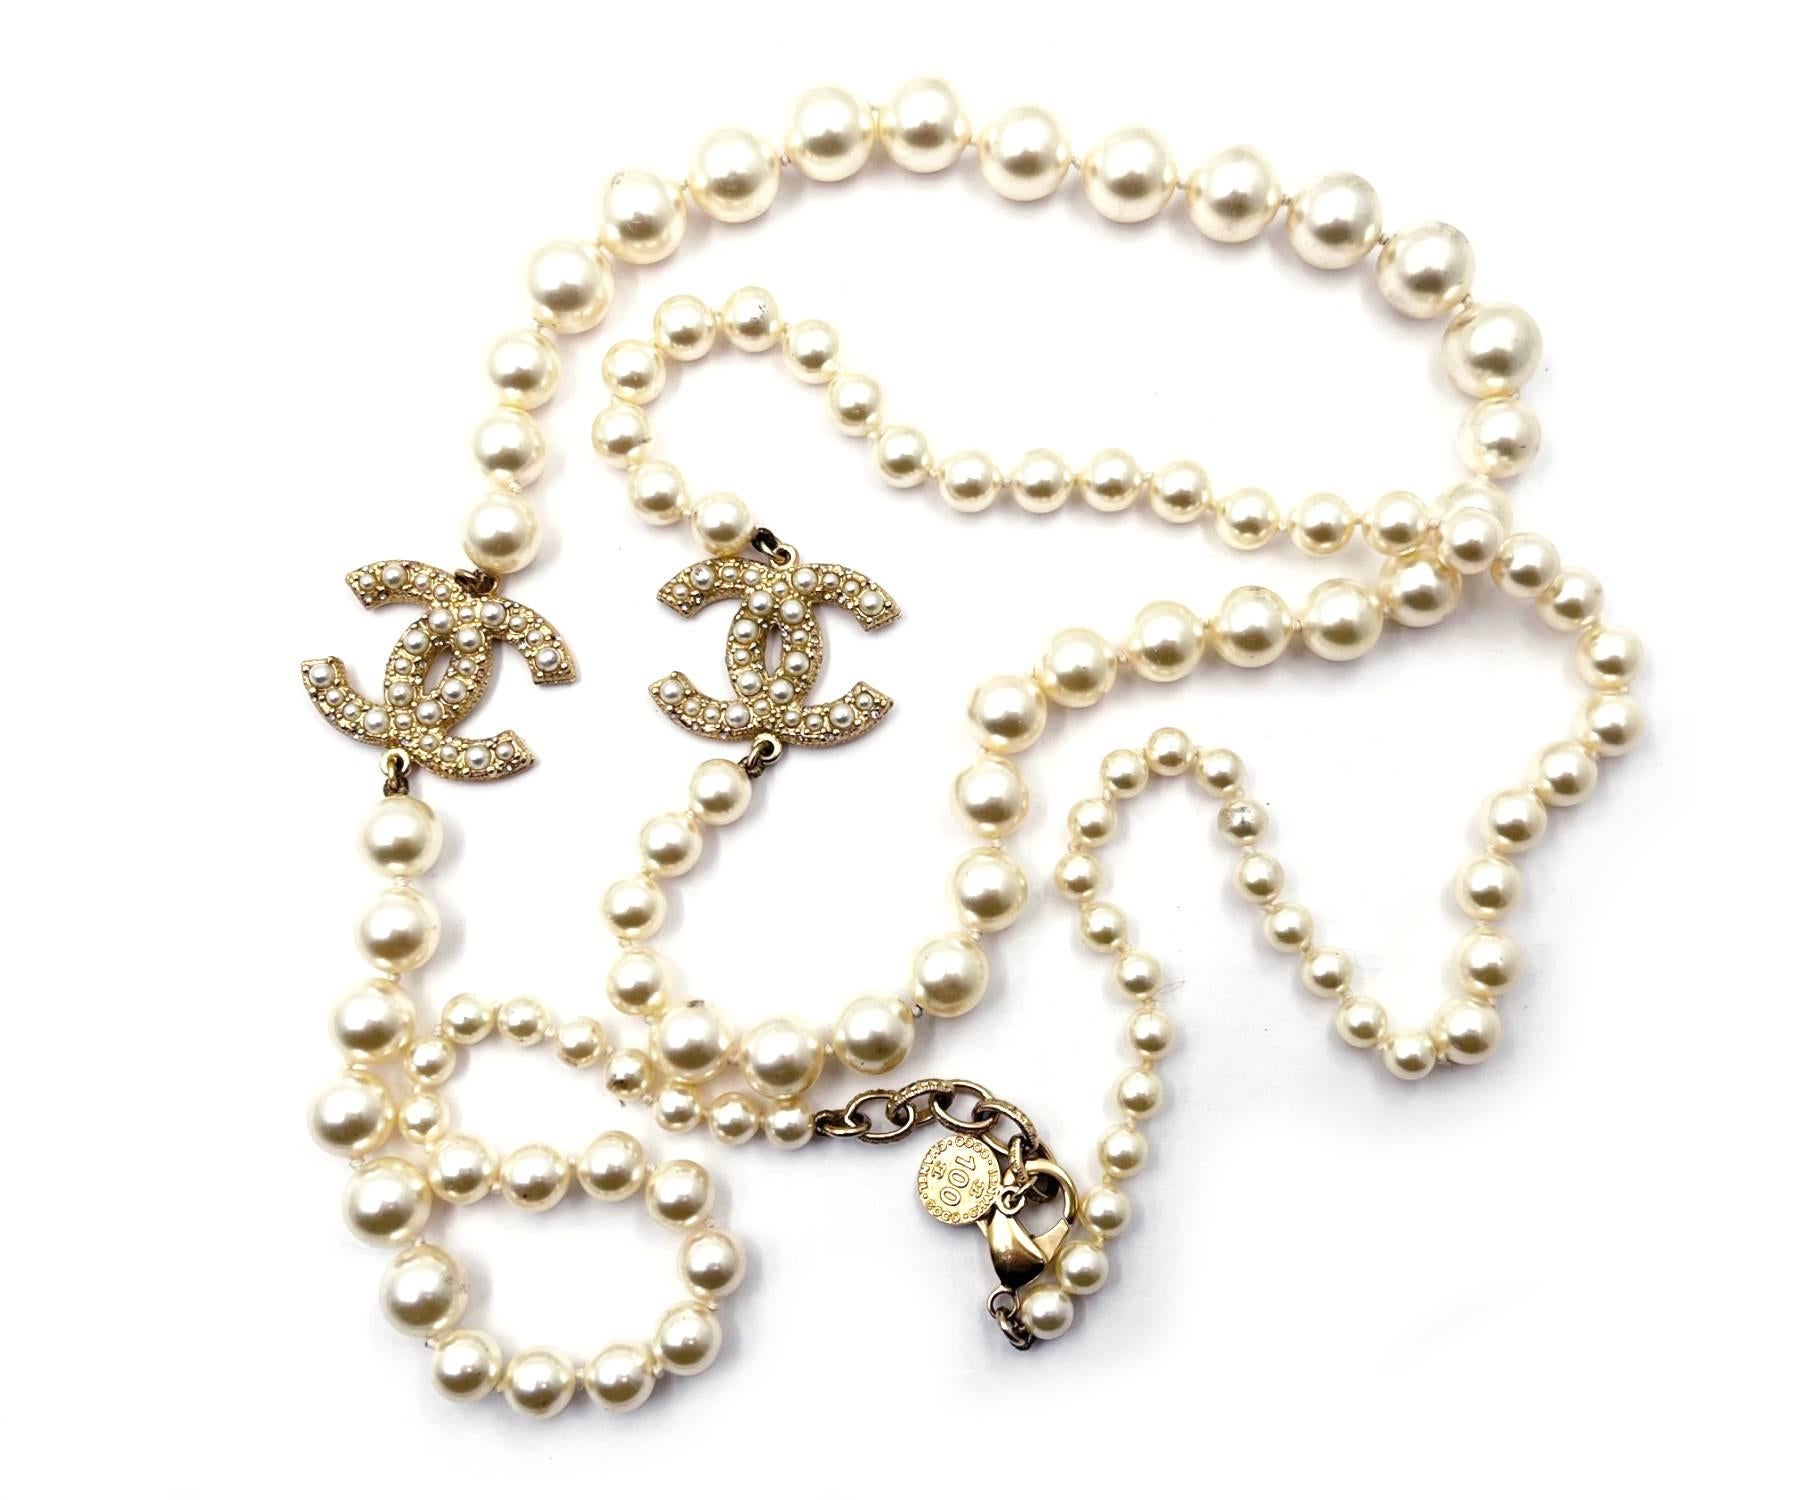 Chanel Gold CC Scatter Pearl Pearl Long Necklace 100 yr Anniversary

*Marked 14
*Made in France
*Comes with the original box, tag, barcode sticker and ribbon

-It is approximately 40